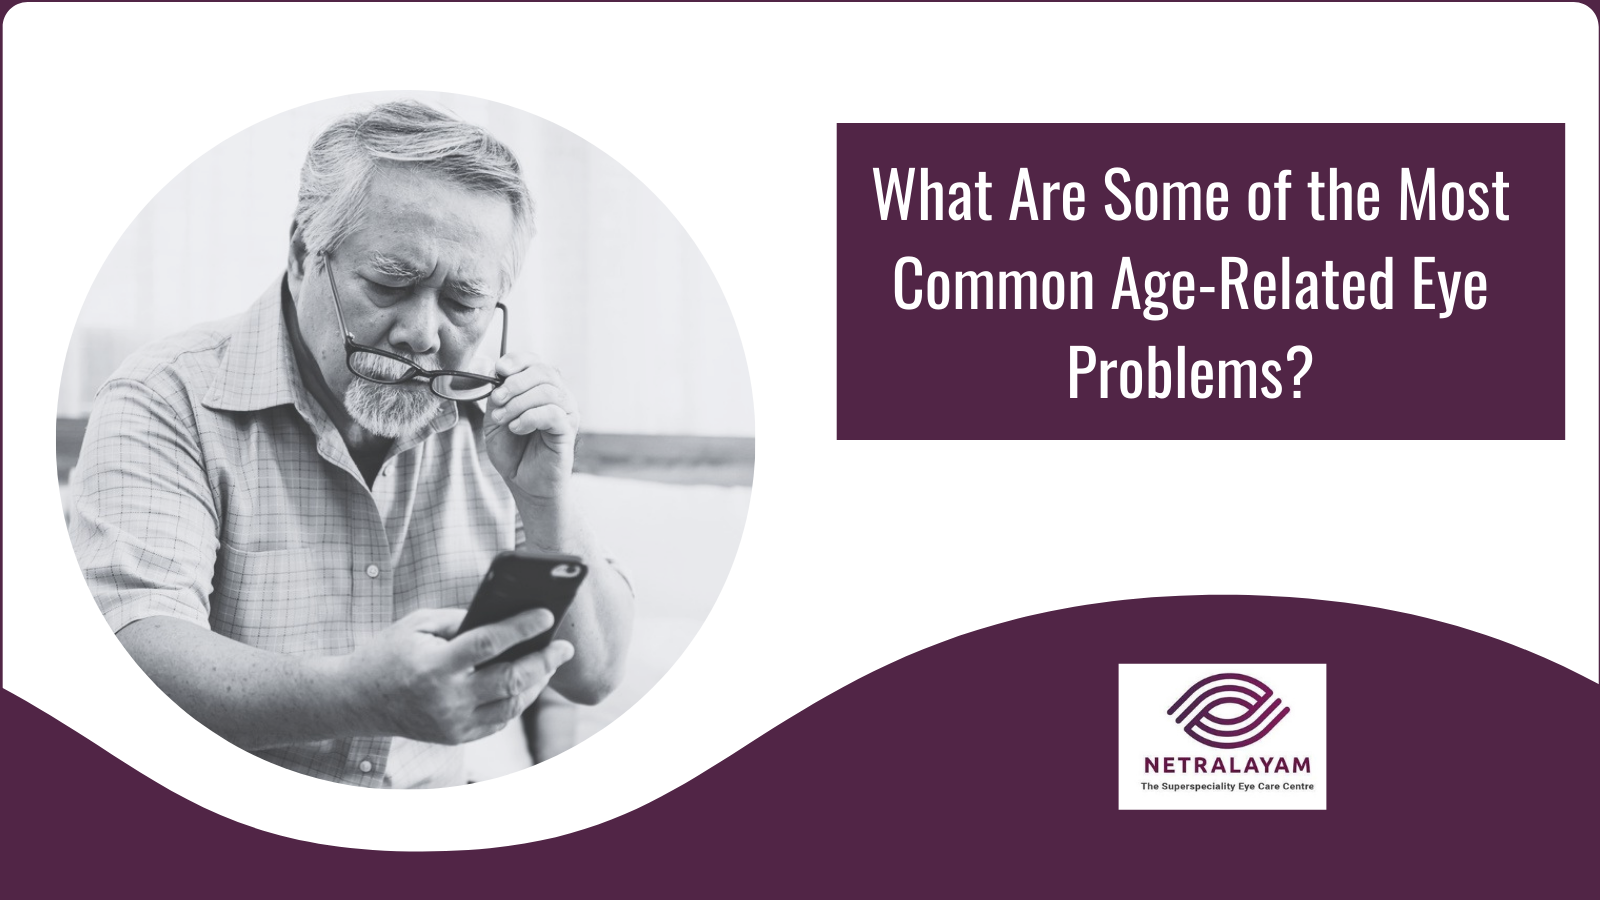 What Are Some of the Most Common Age-Related Eye Problems?